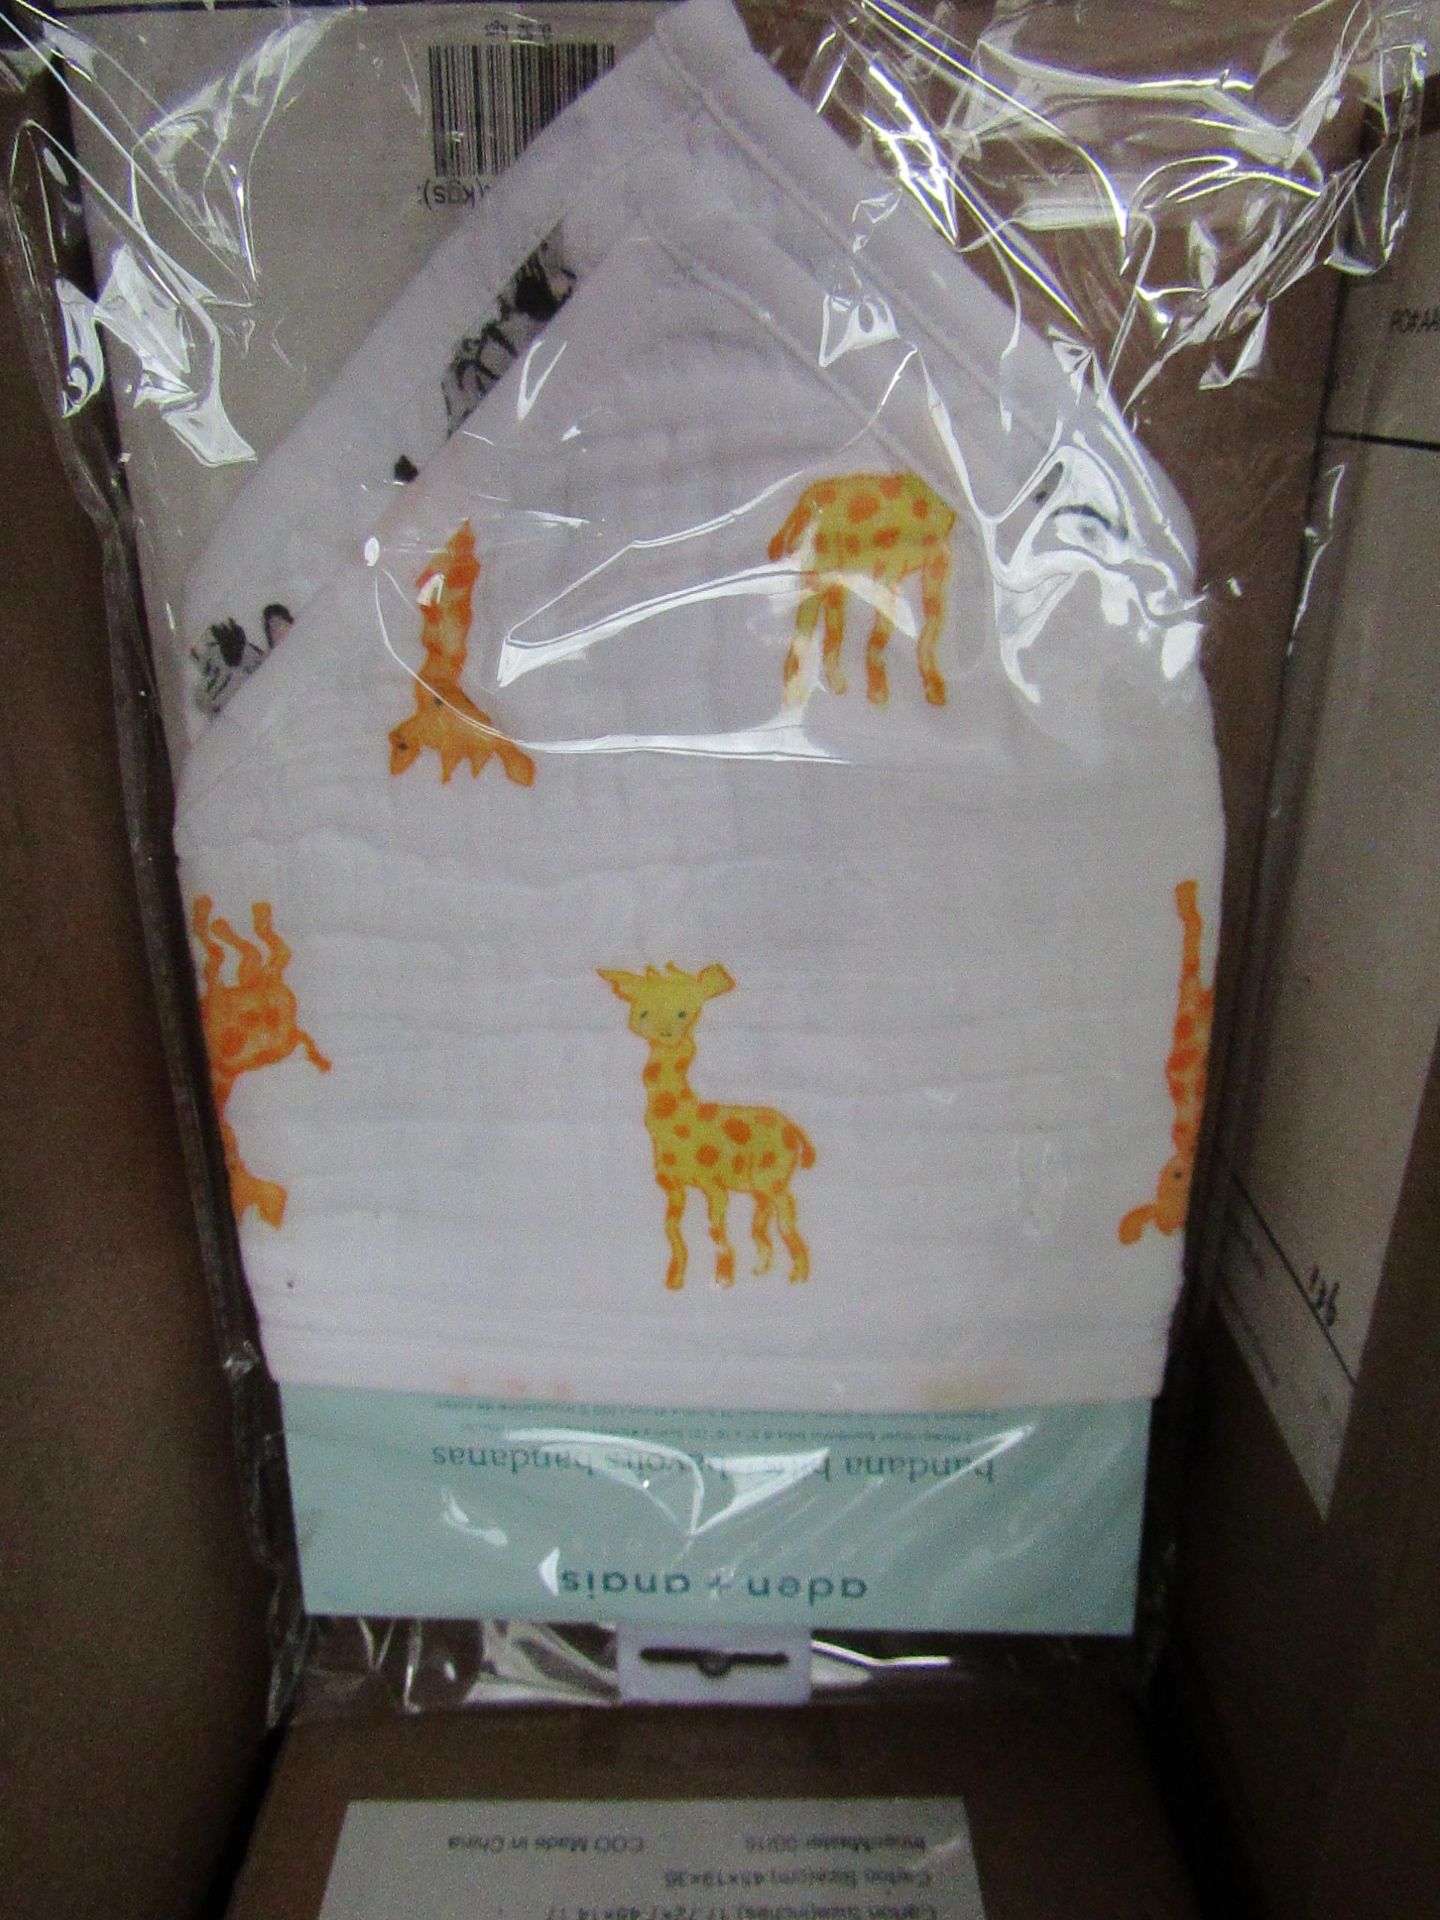 aden + anais pack of 2 three layer Banana Bibs, new and sealed in box